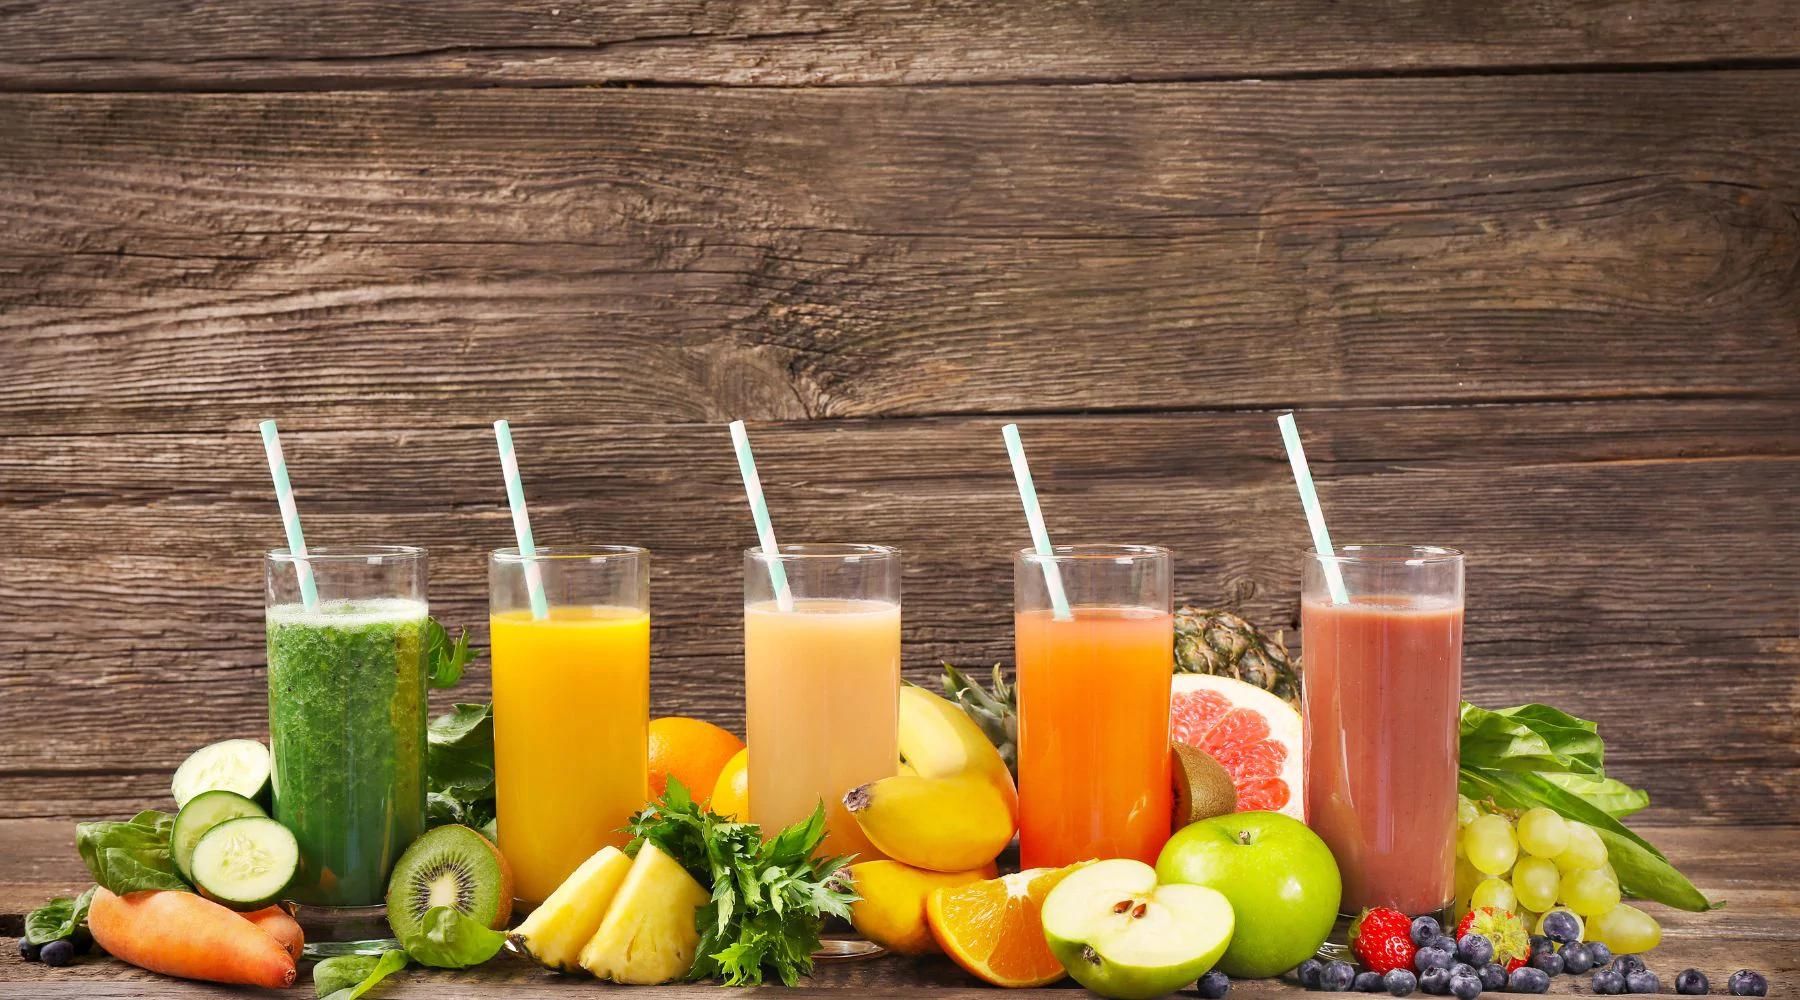 5 Healthy Detox Juices To Aid Weight Loss